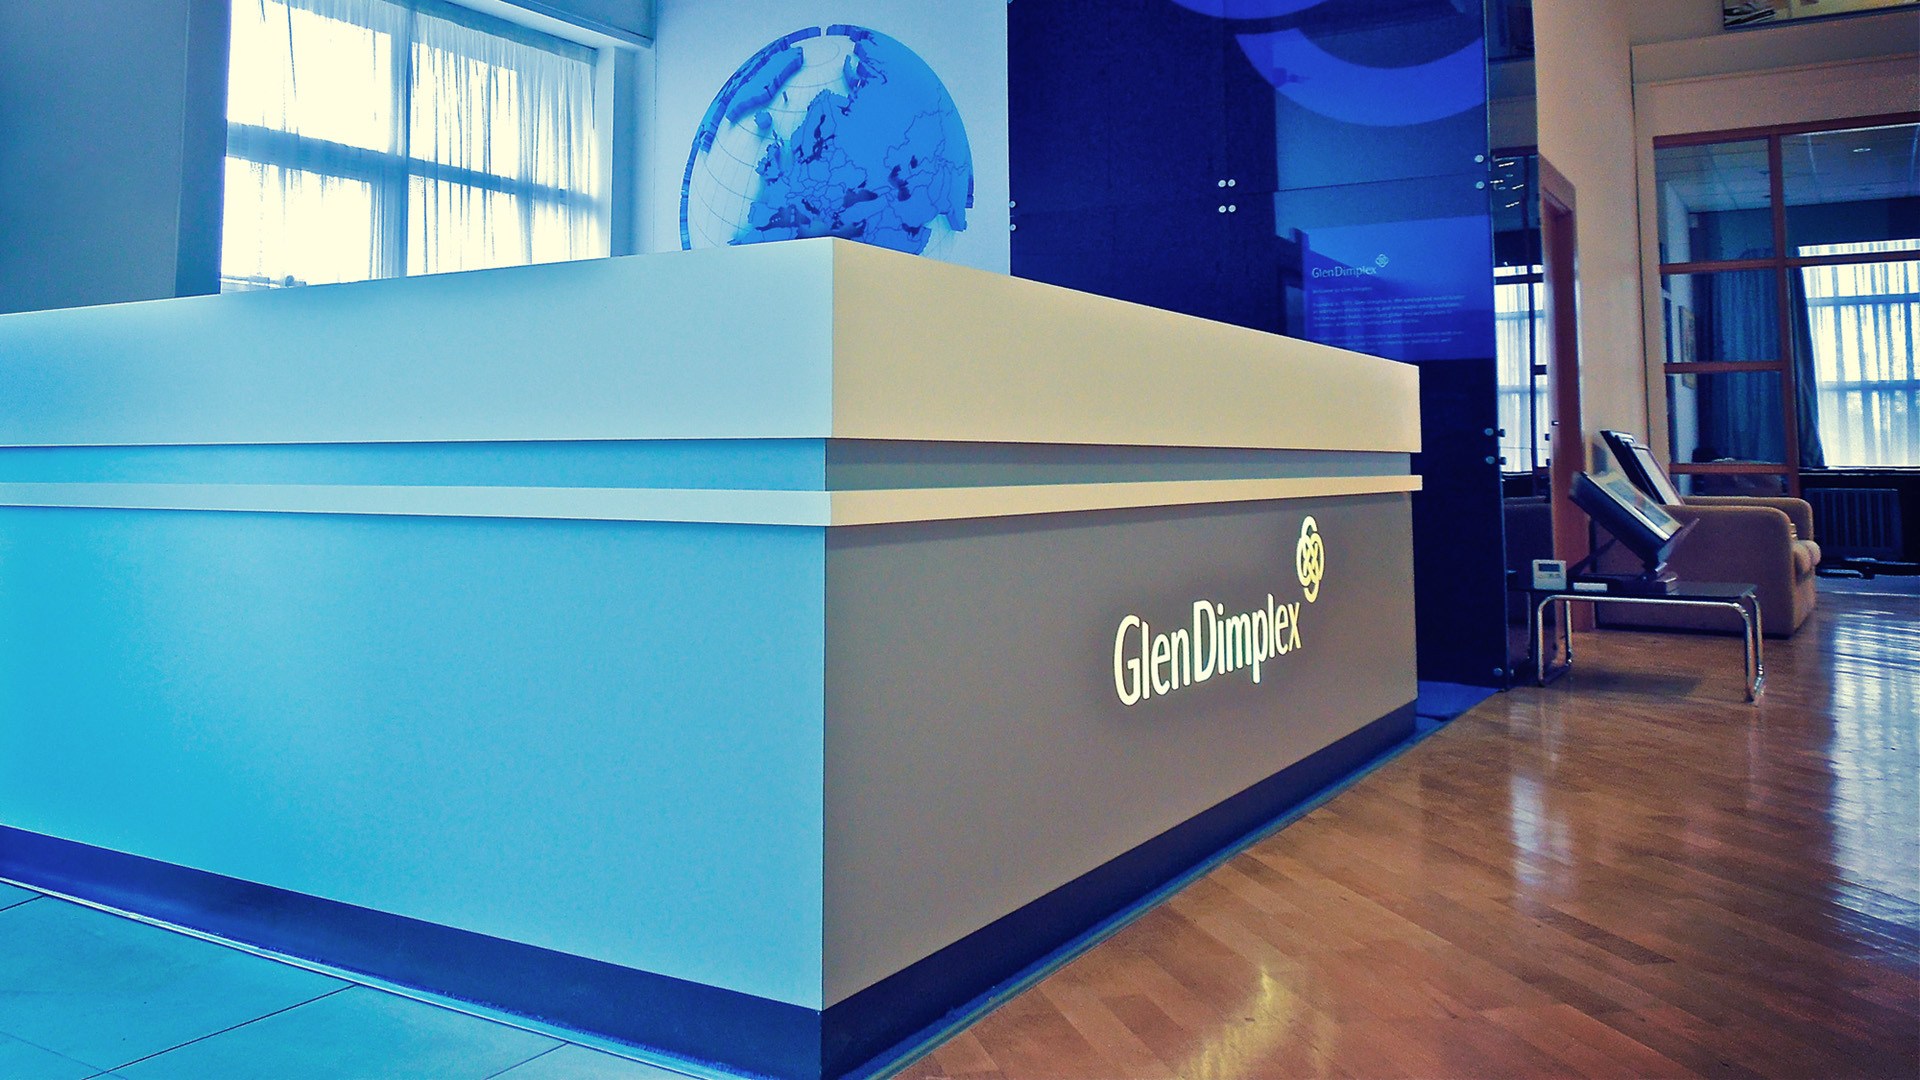 Reception desk manufactured and fitted by shopfitout.com for Glen Dimplex in Dublin HQ